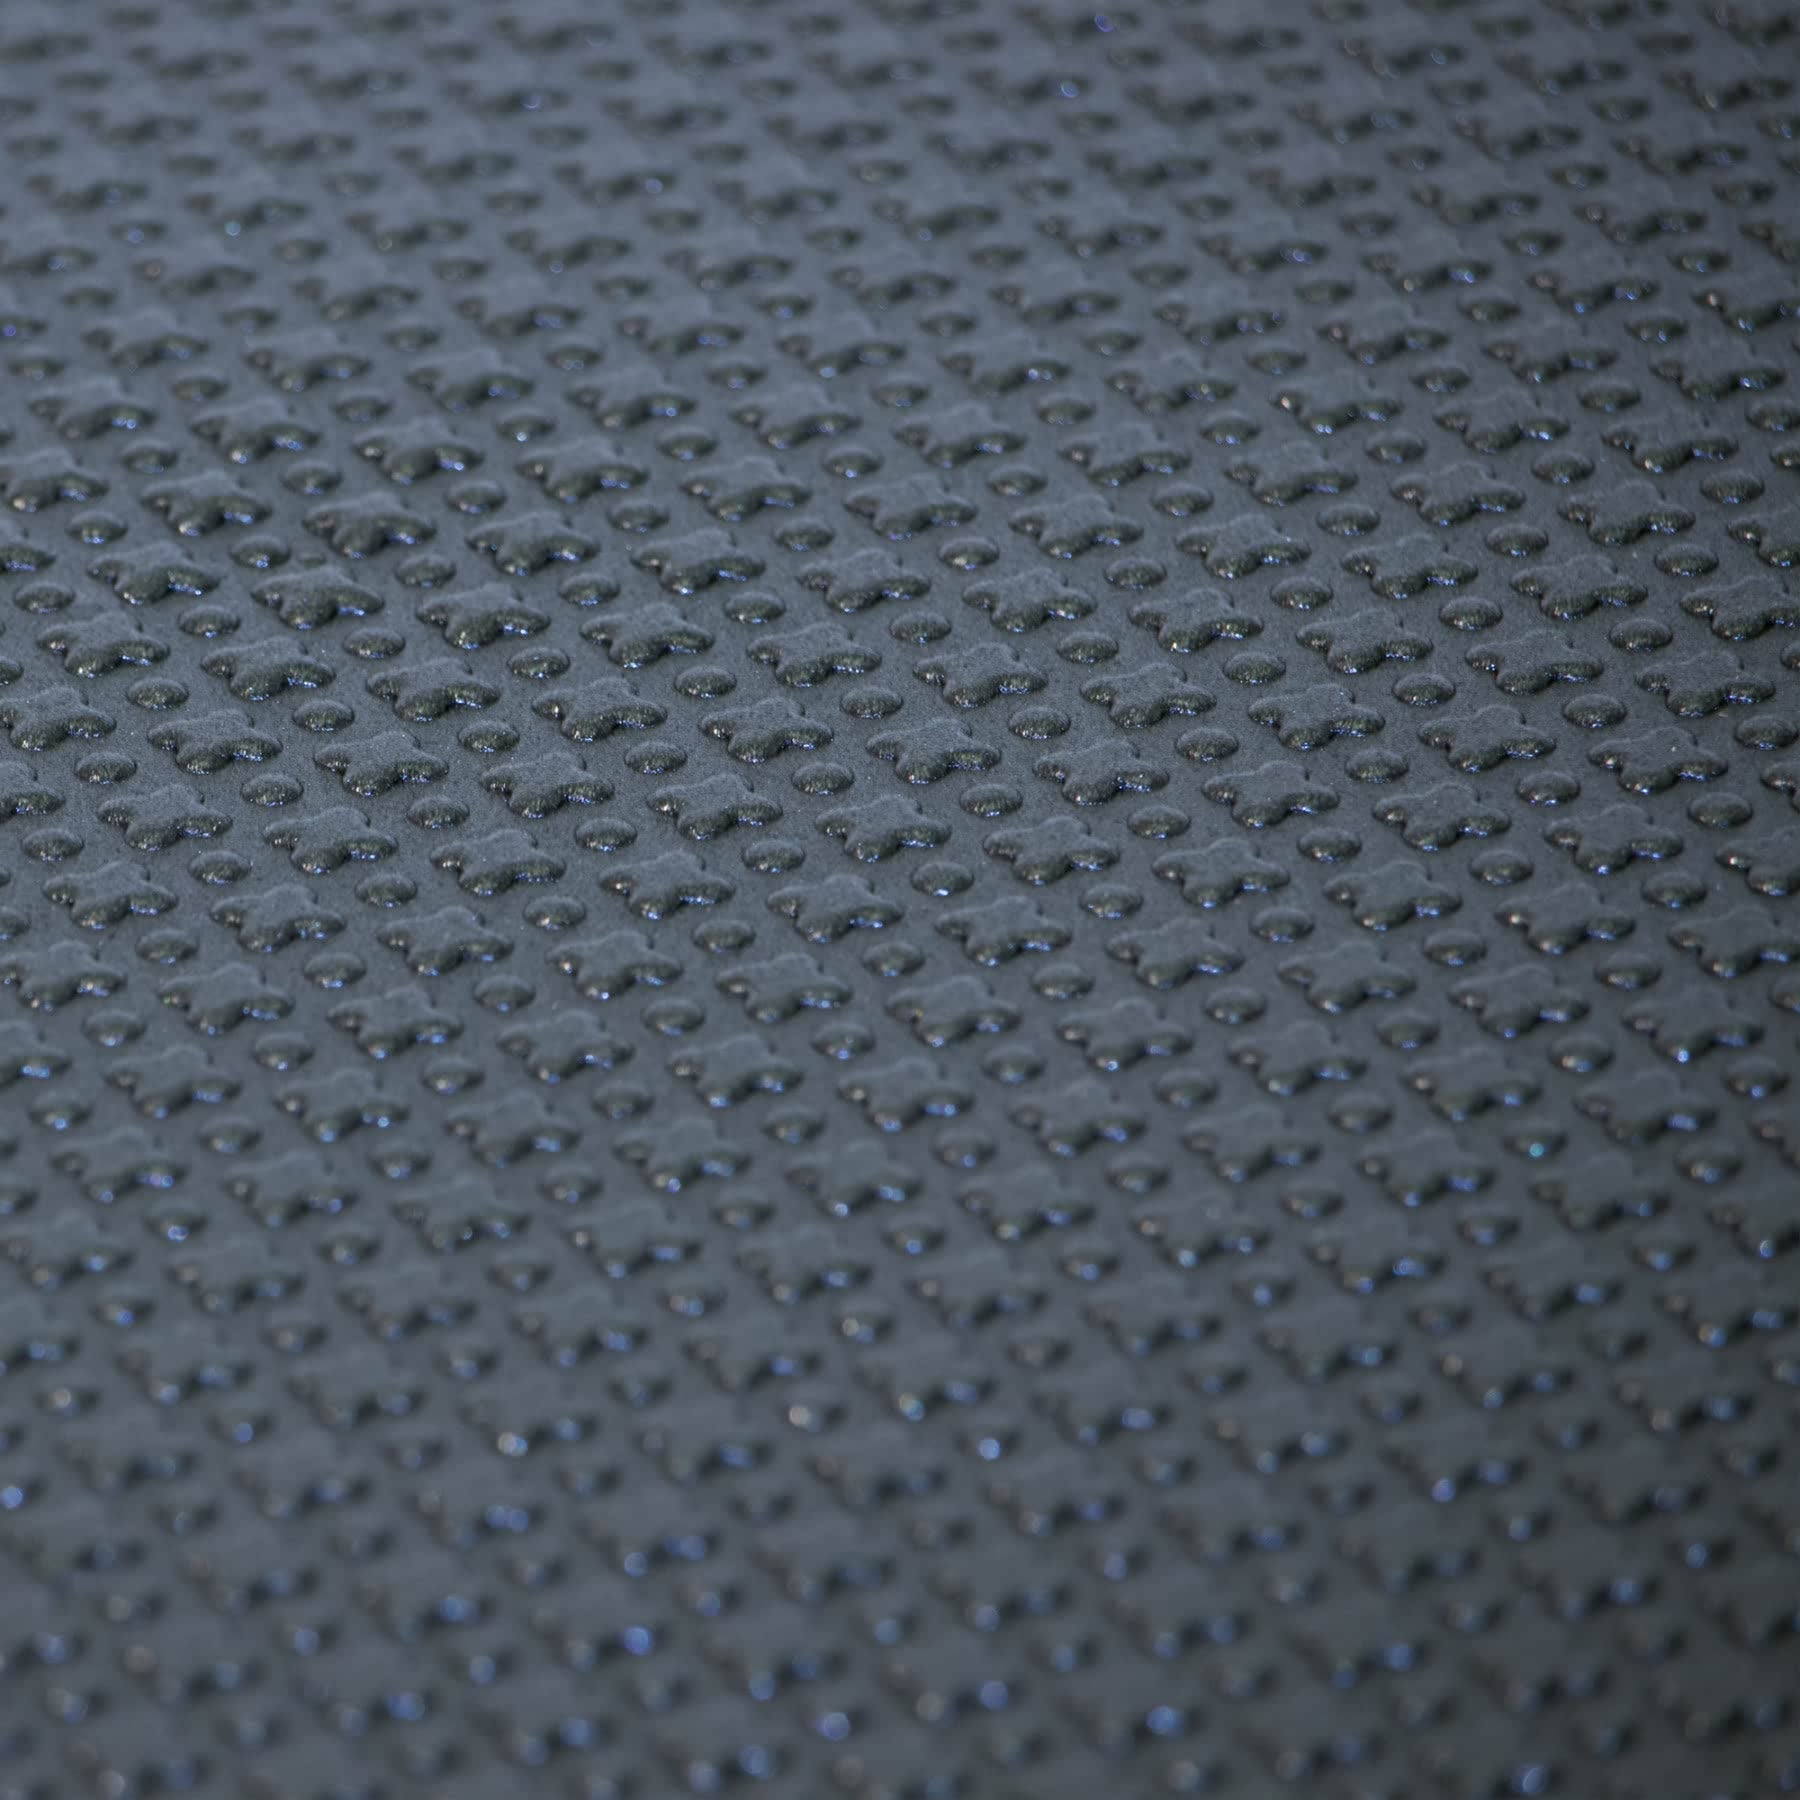 the textured surface of a black fitness exercise mat